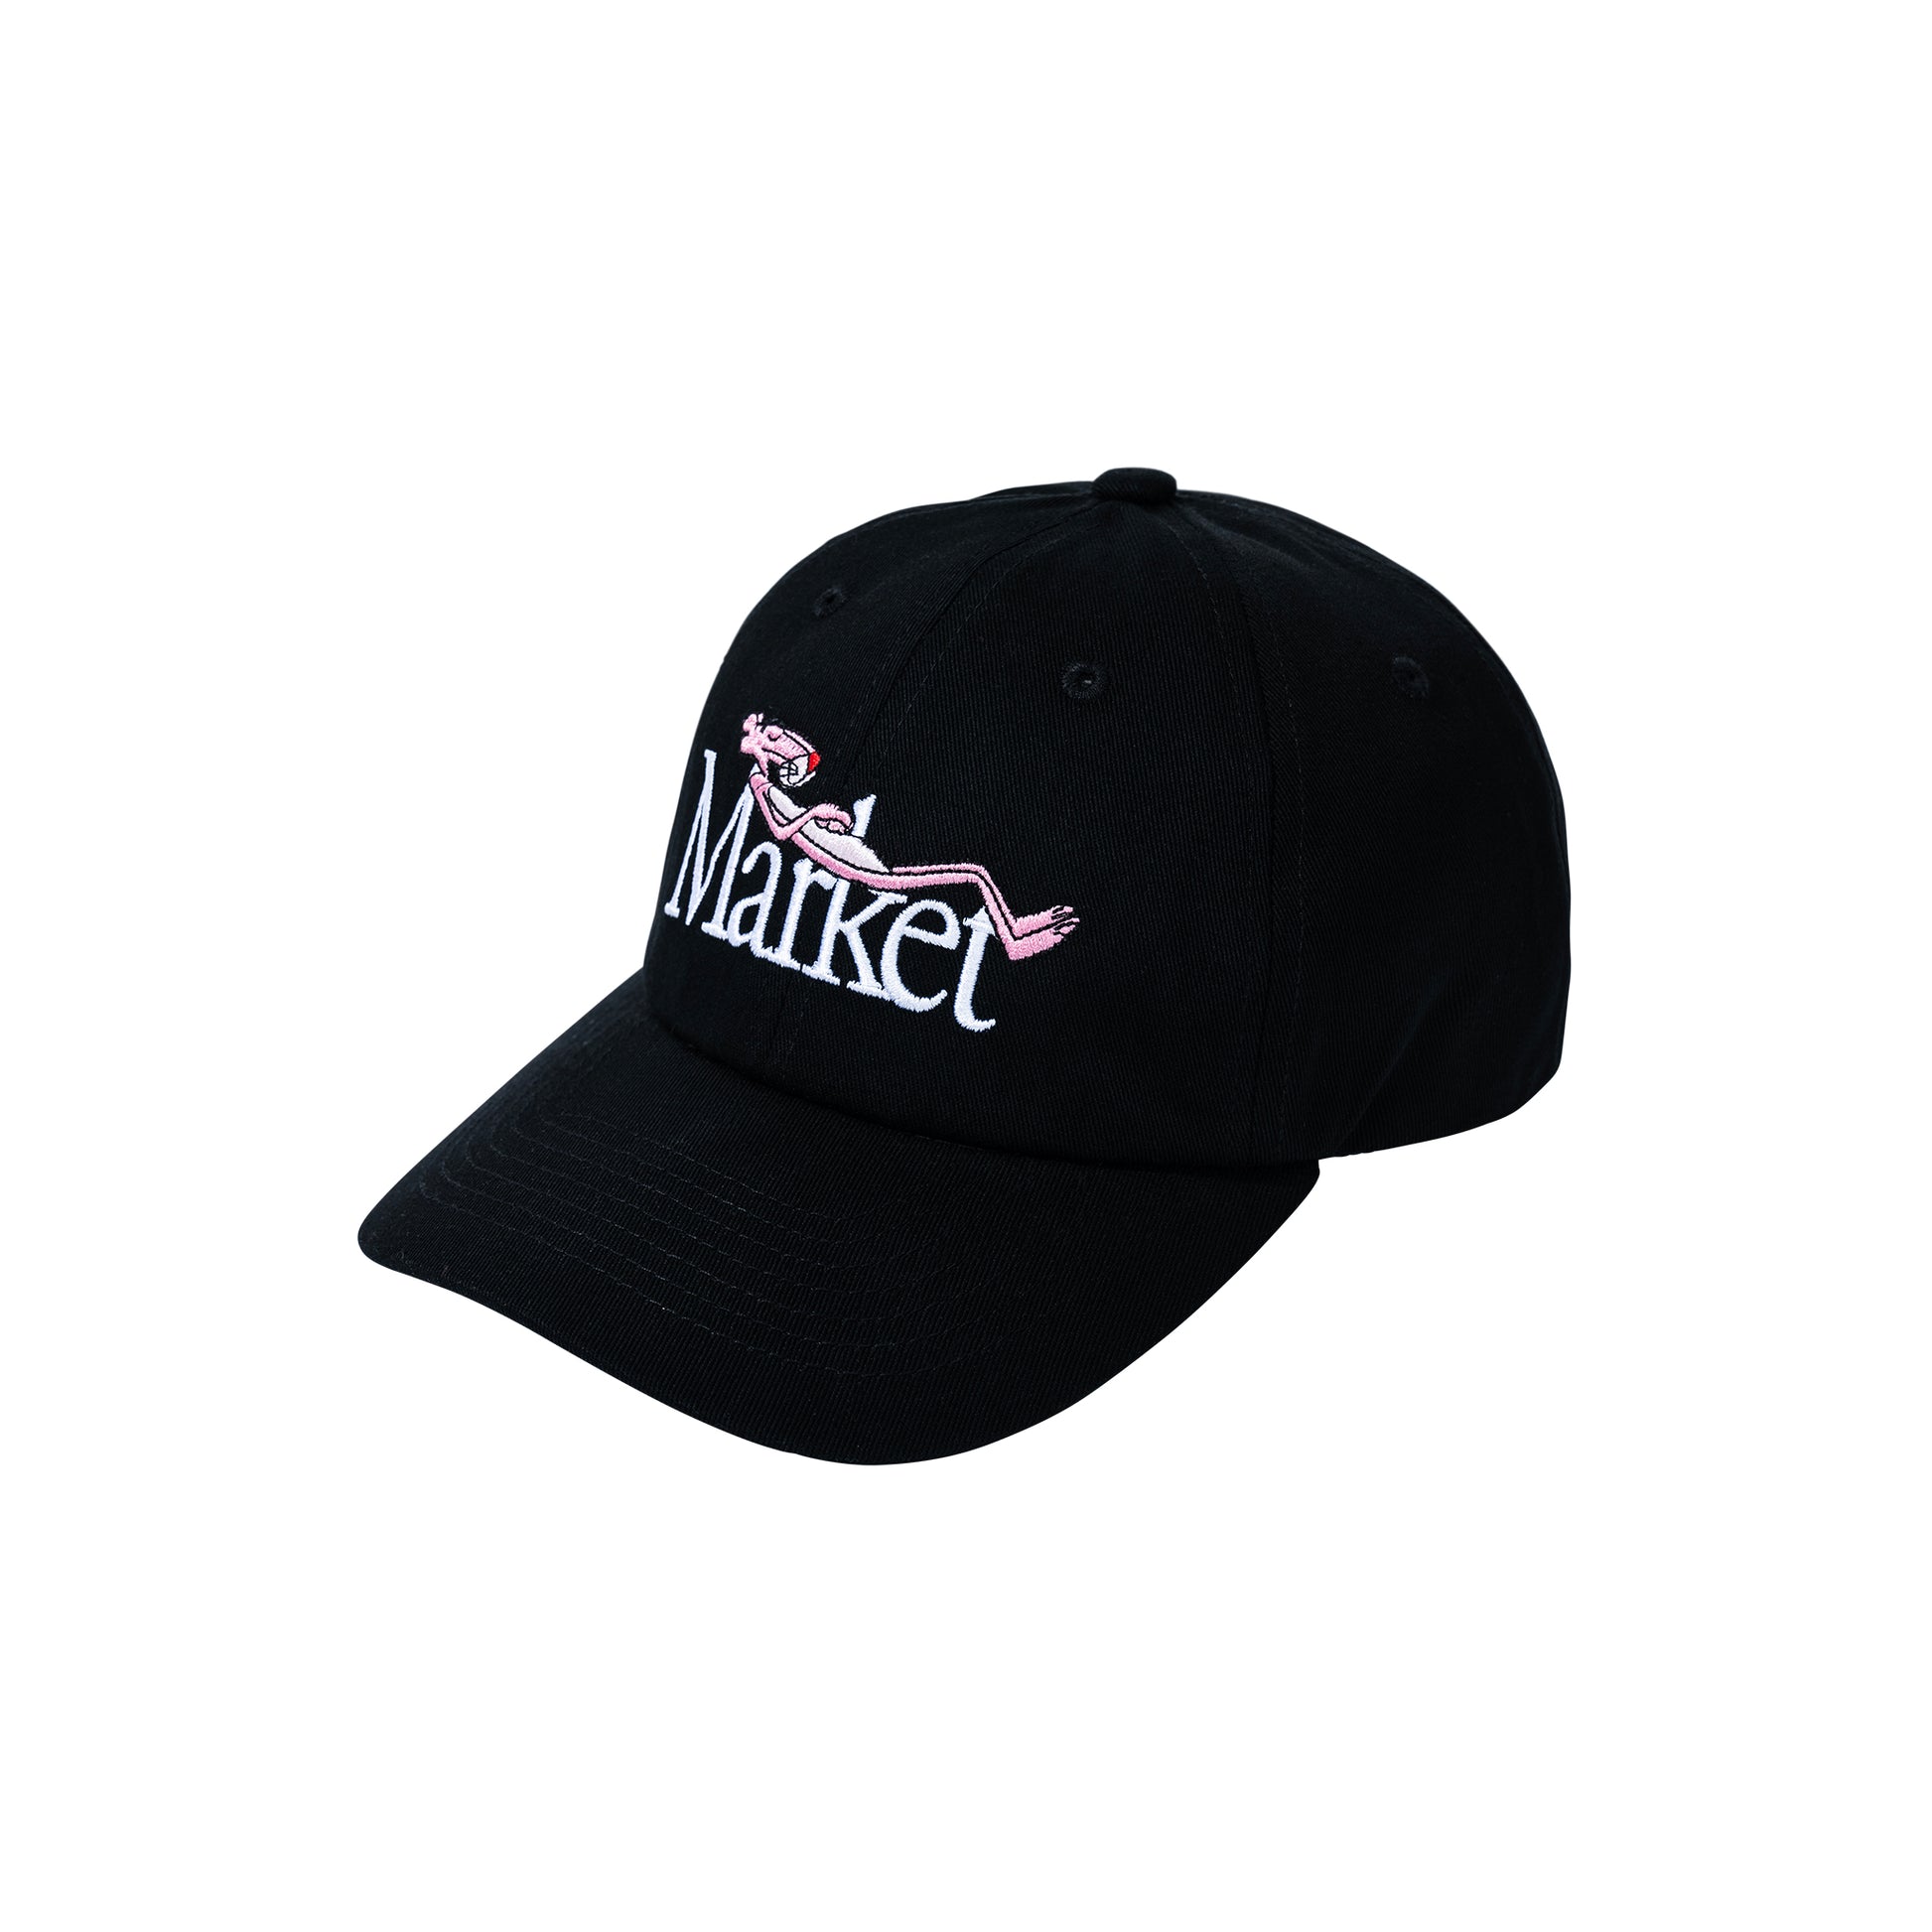 MARKET clothing brand PINK PANTHER SLEEPY 6 PANEL HAT. Find more graphic tees, hats, beanies, hoodies at MarketStudios.com. Formally Chinatown Market. 